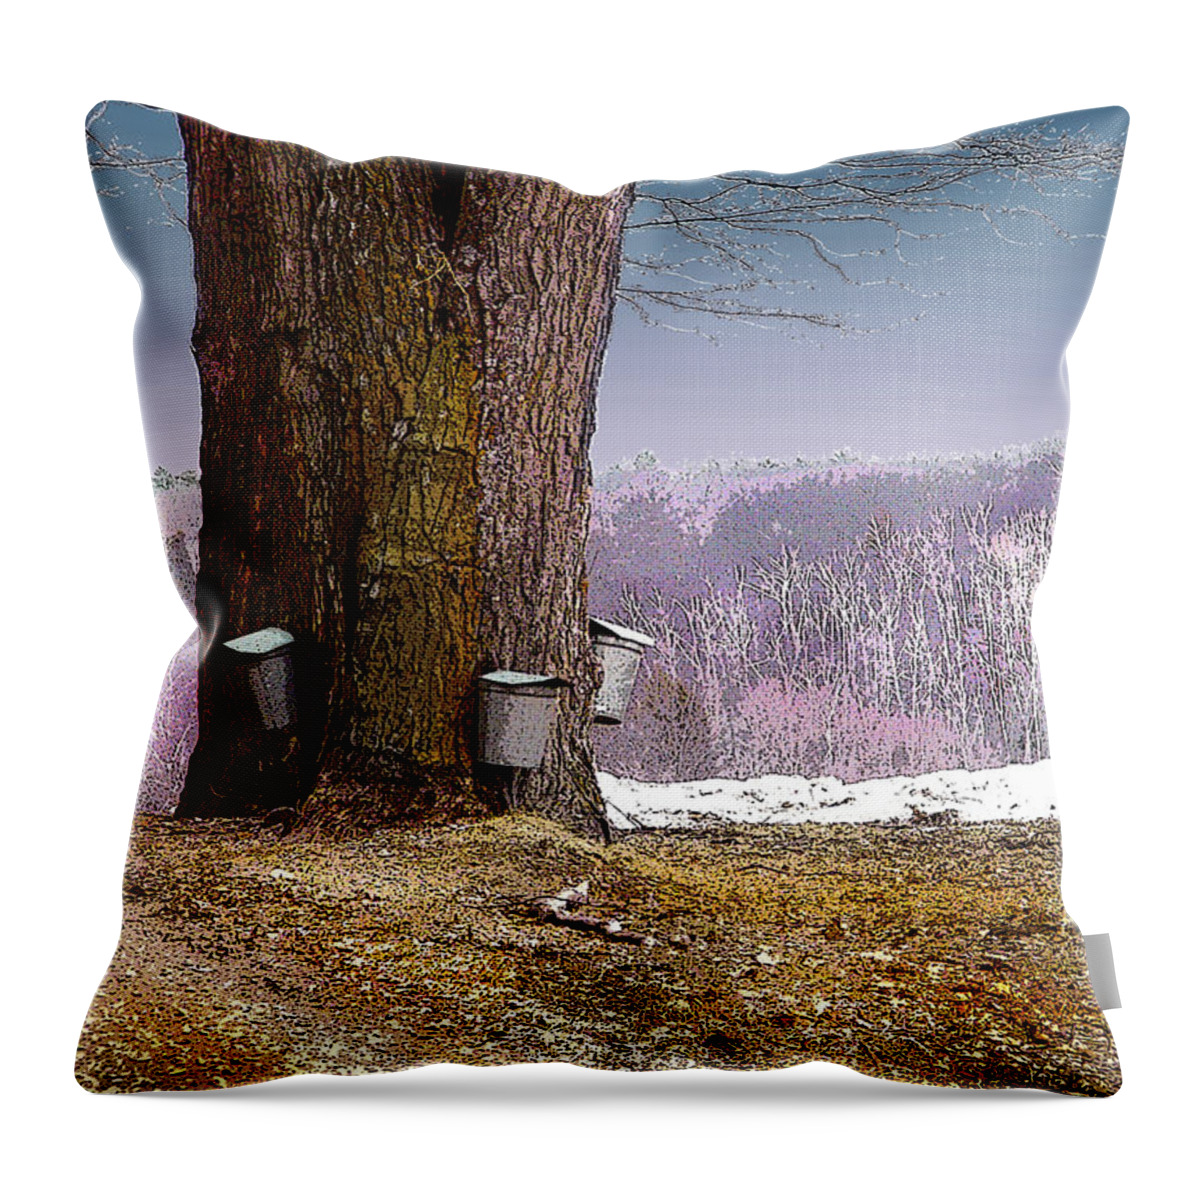 Landscape Throw Pillow featuring the digital art Maple Buckets by Nancy Griswold